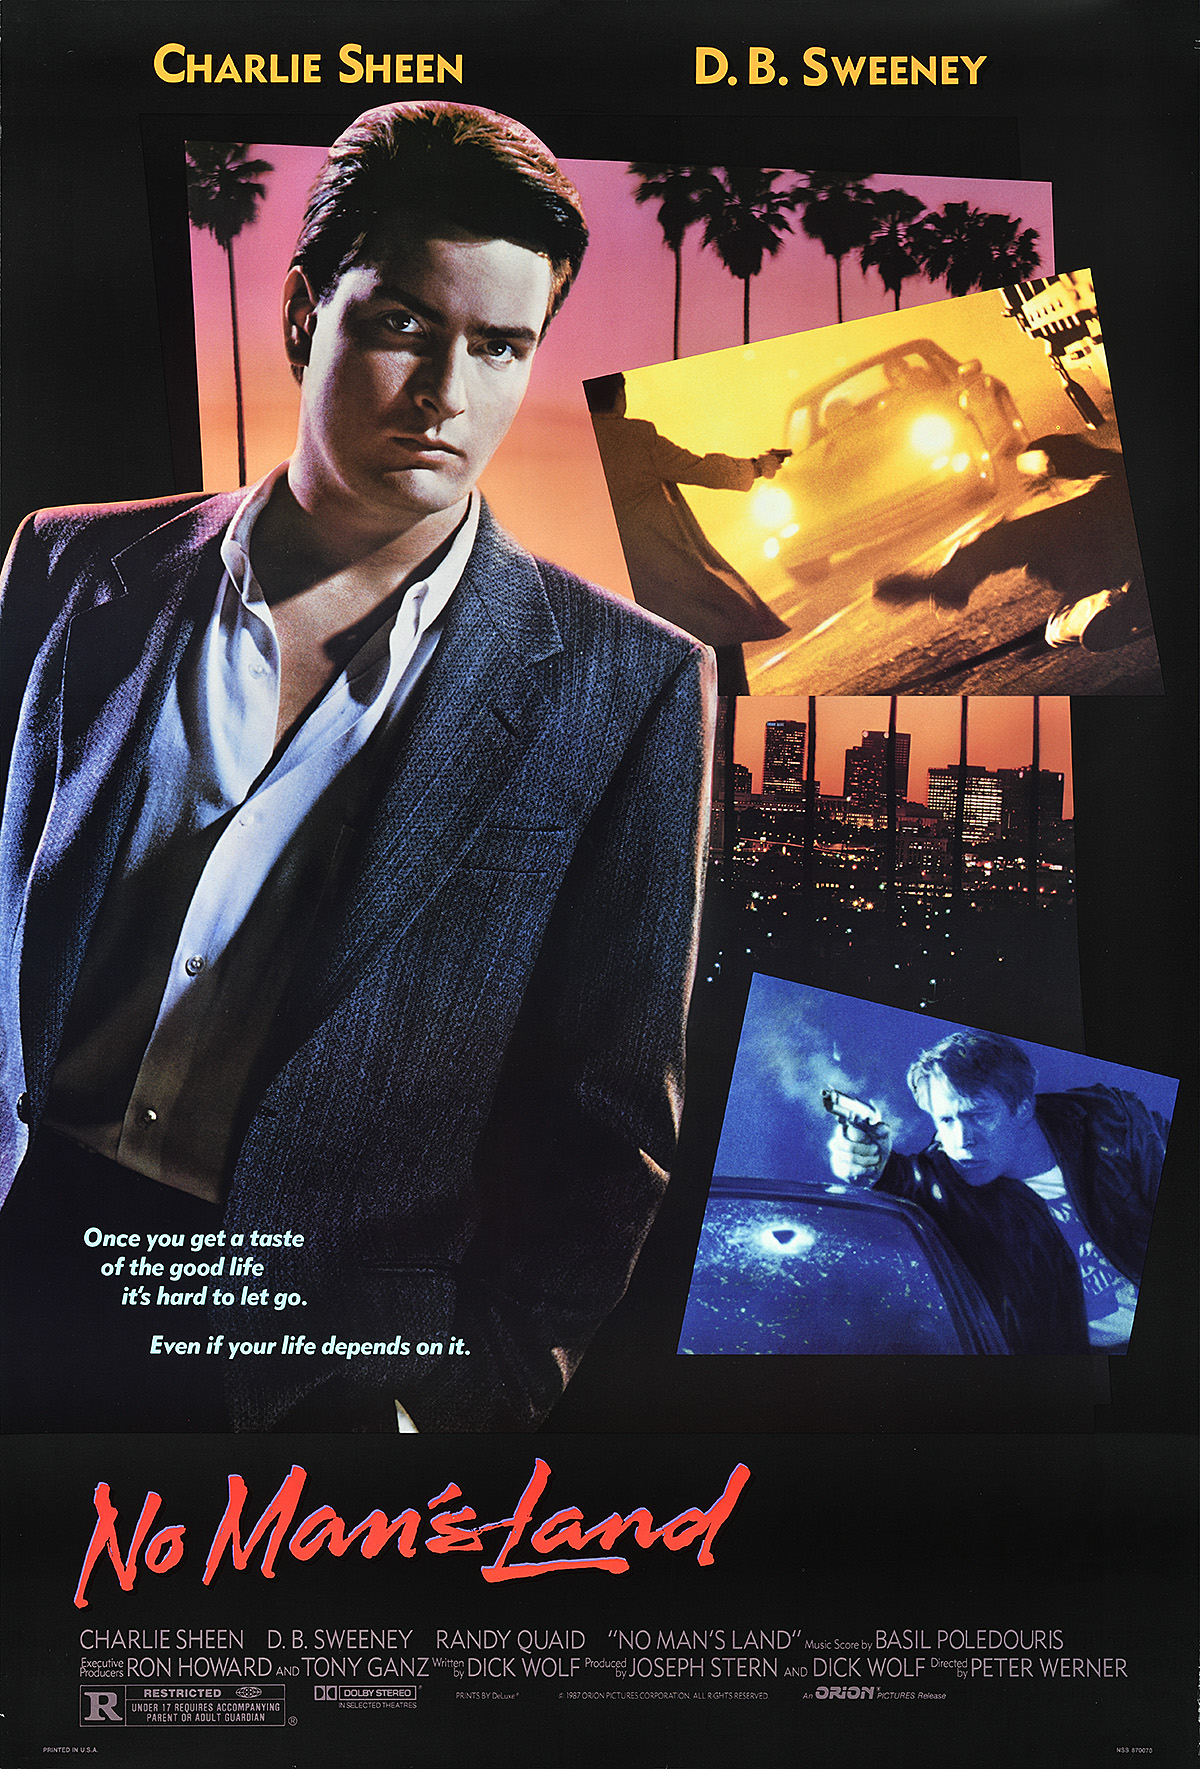 A poster of a suave suited man in front of a series of images of palm trees, a city, and gunfights.